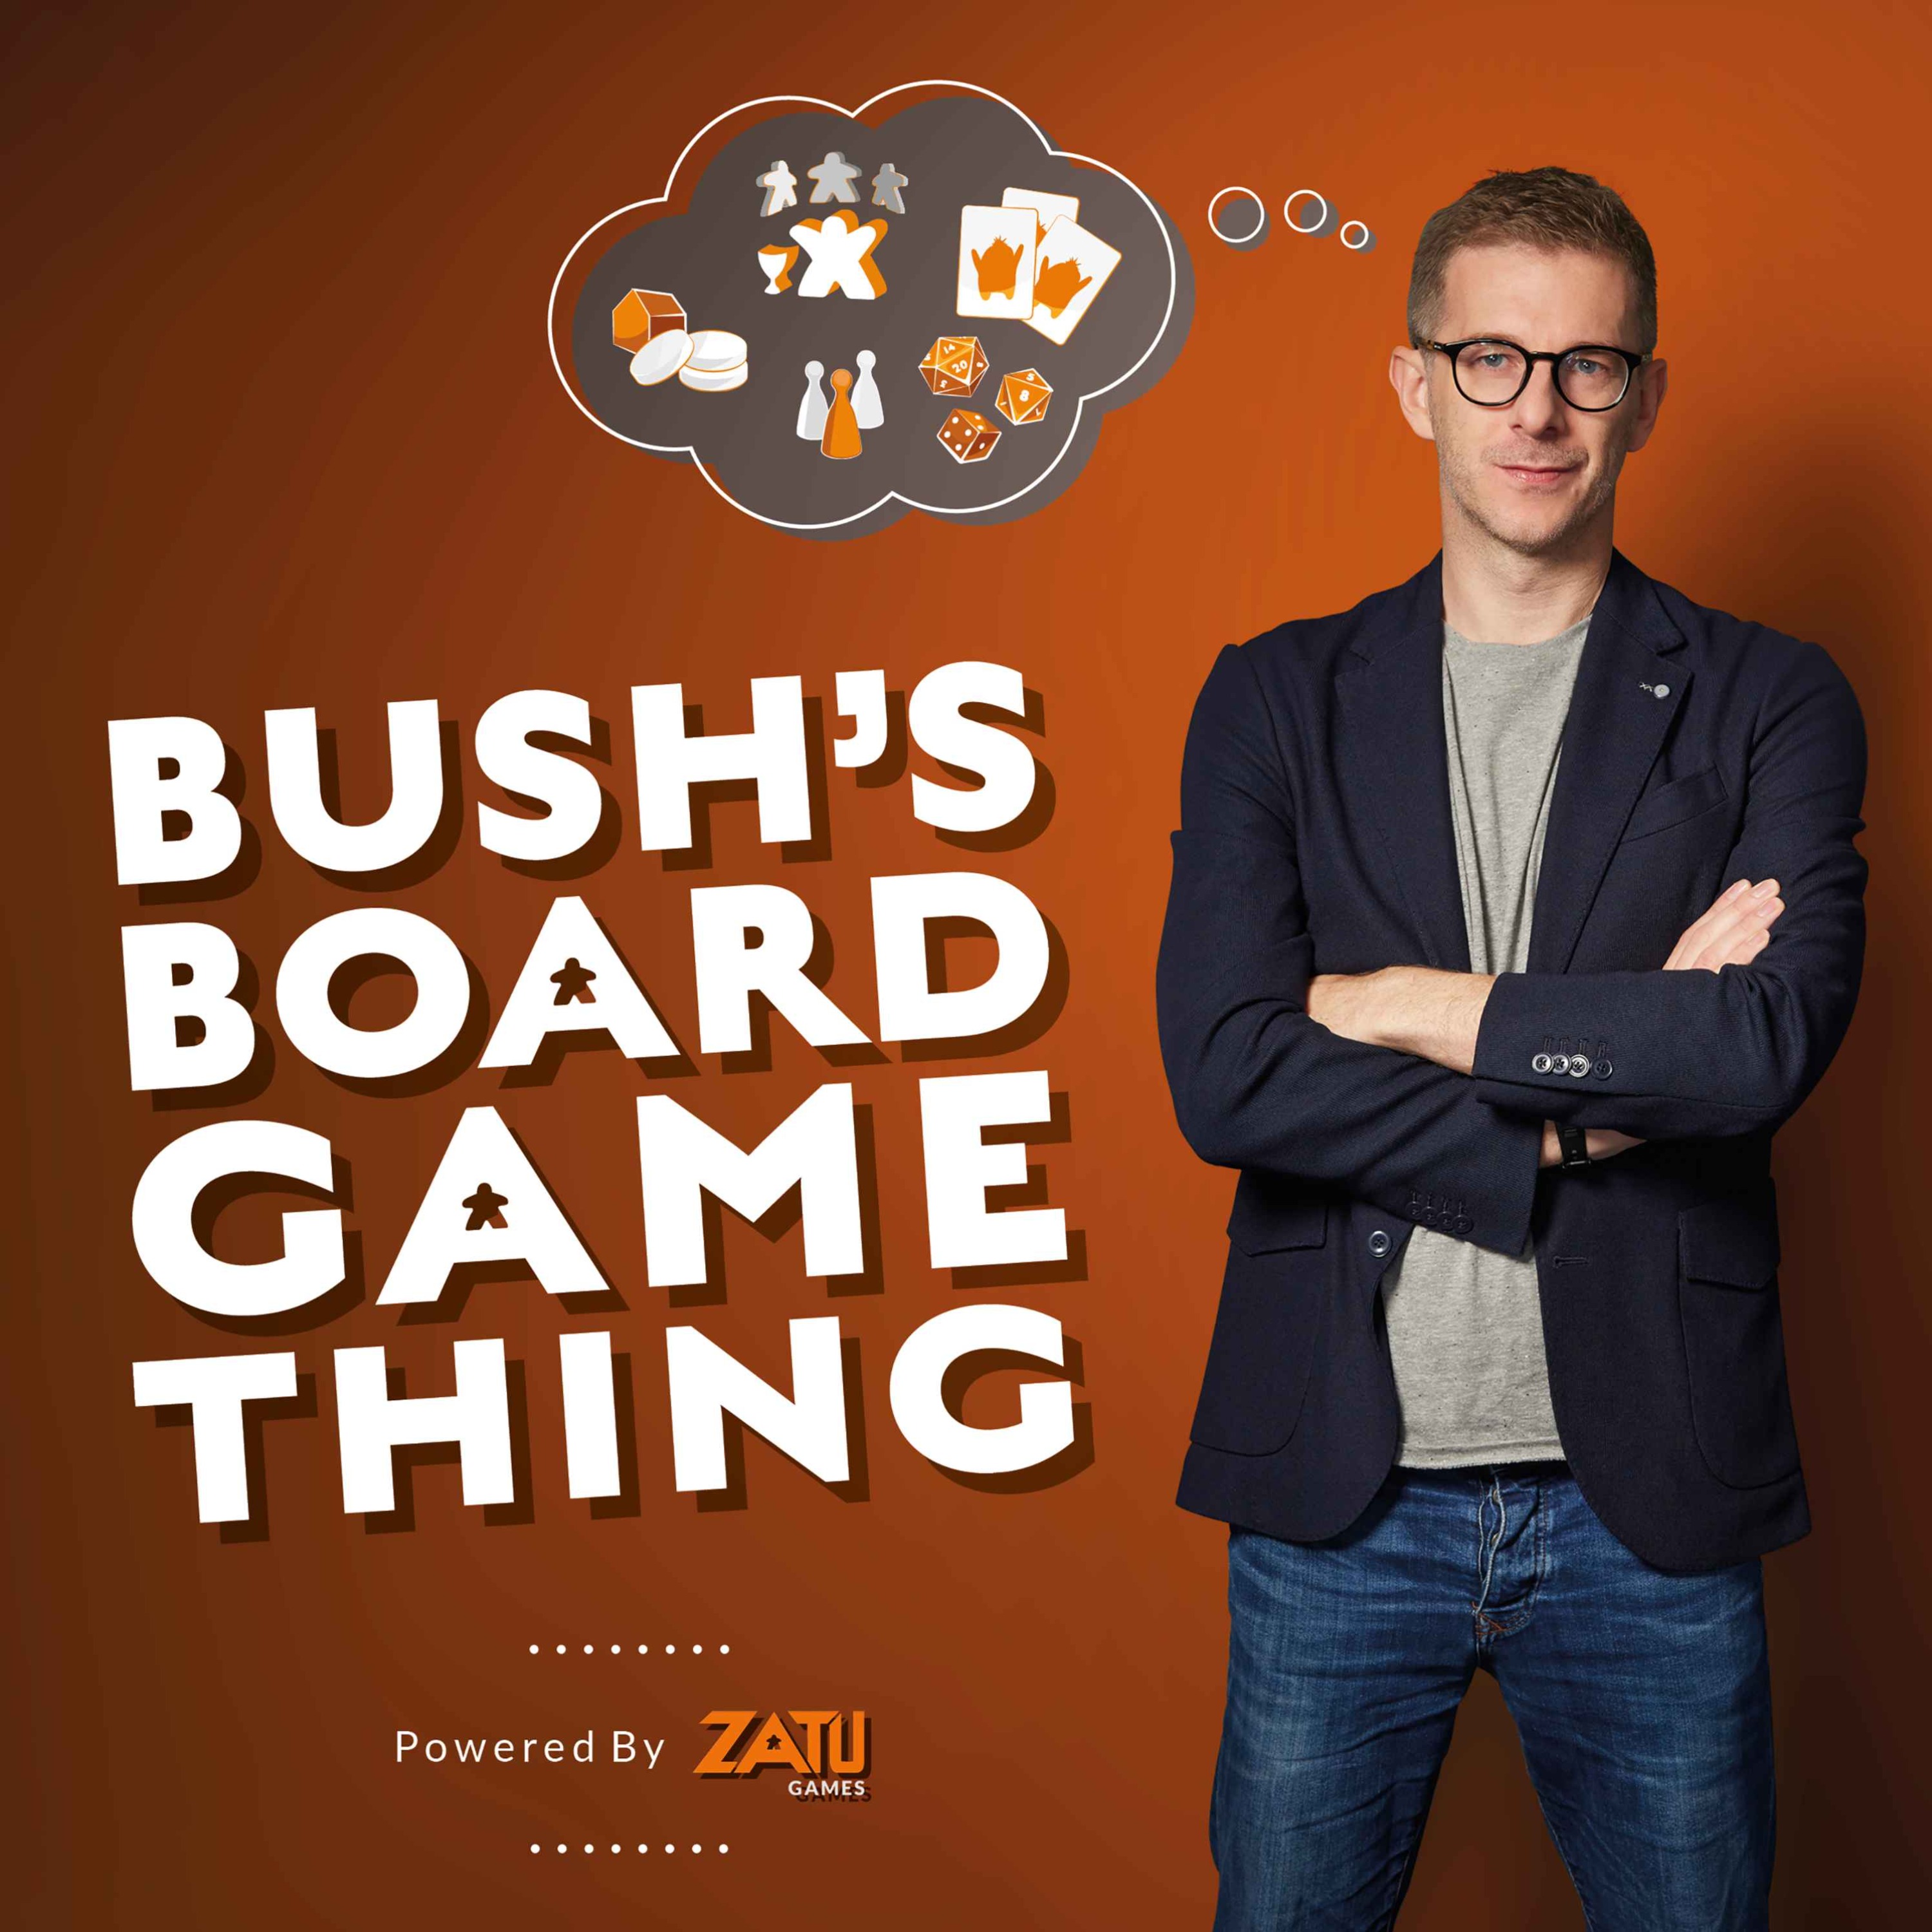 Introducing Bush's Board Game Thing